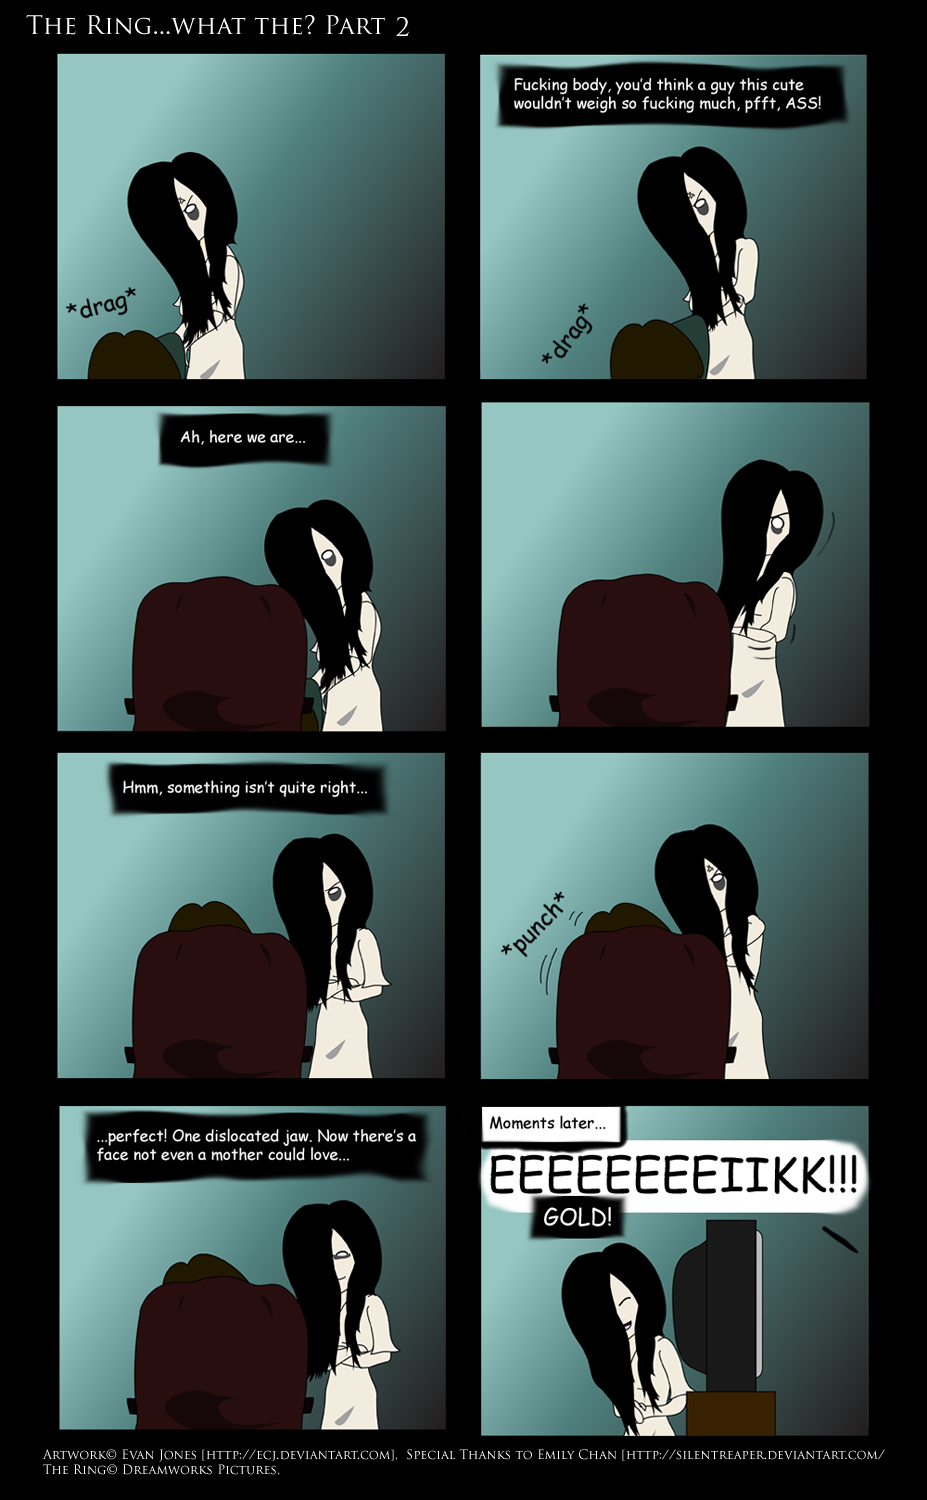 The Ring...what the? pt 2 by EvJones on DeviantArt